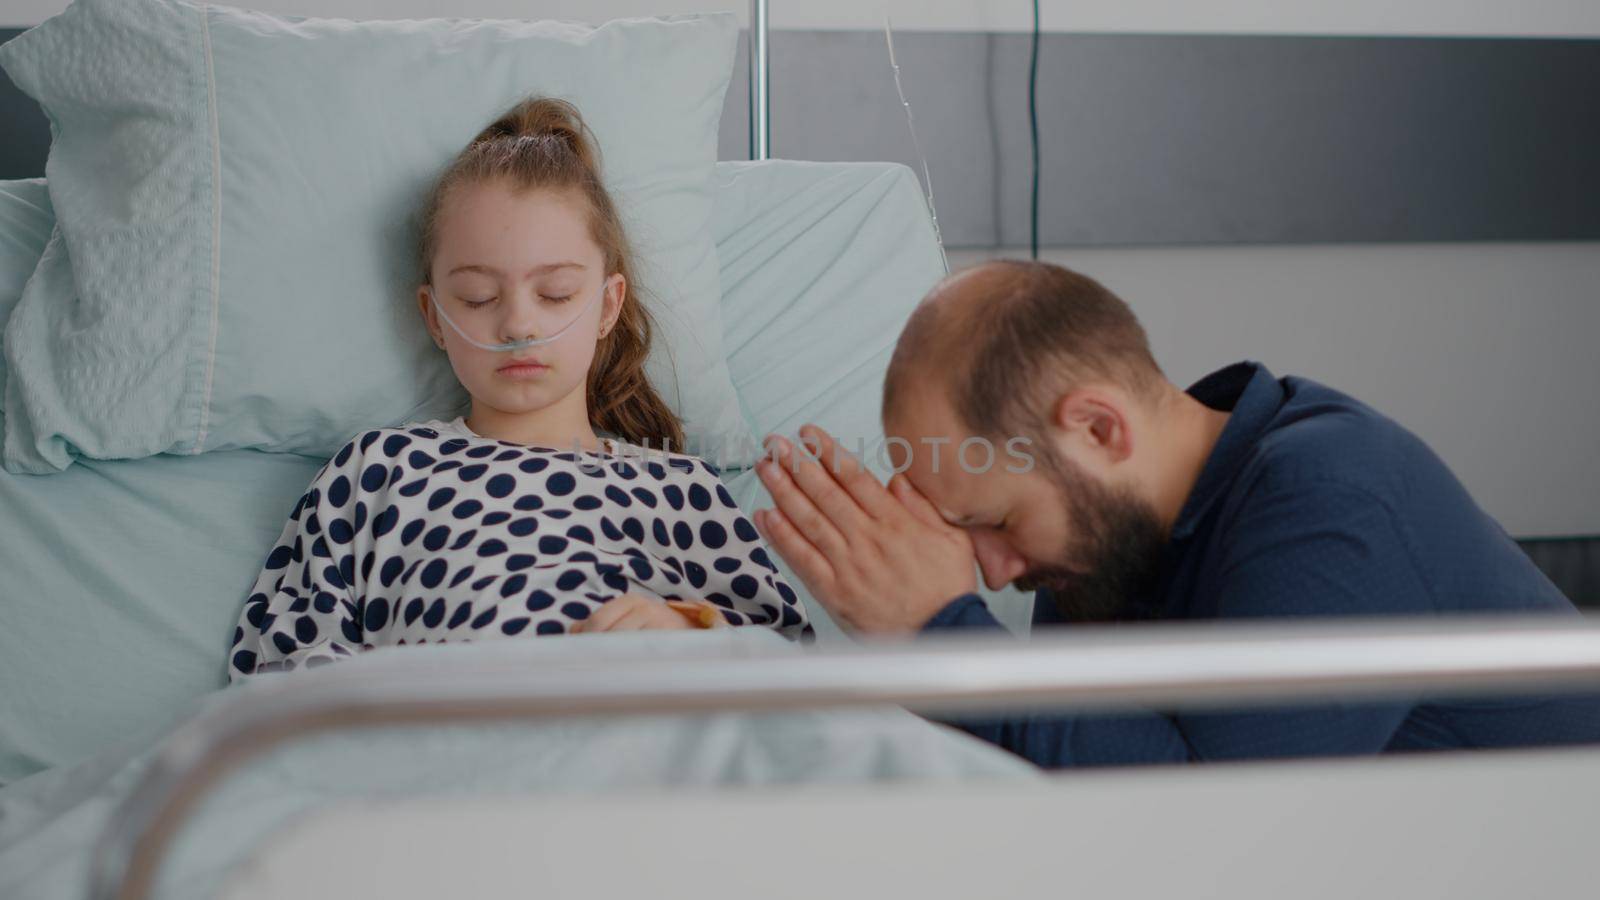 Worried father praying for sick girl daughter health recovery after suffering medical surgery in hospital ward. Little child with oxygen nasal tube sleeping during sickness examination